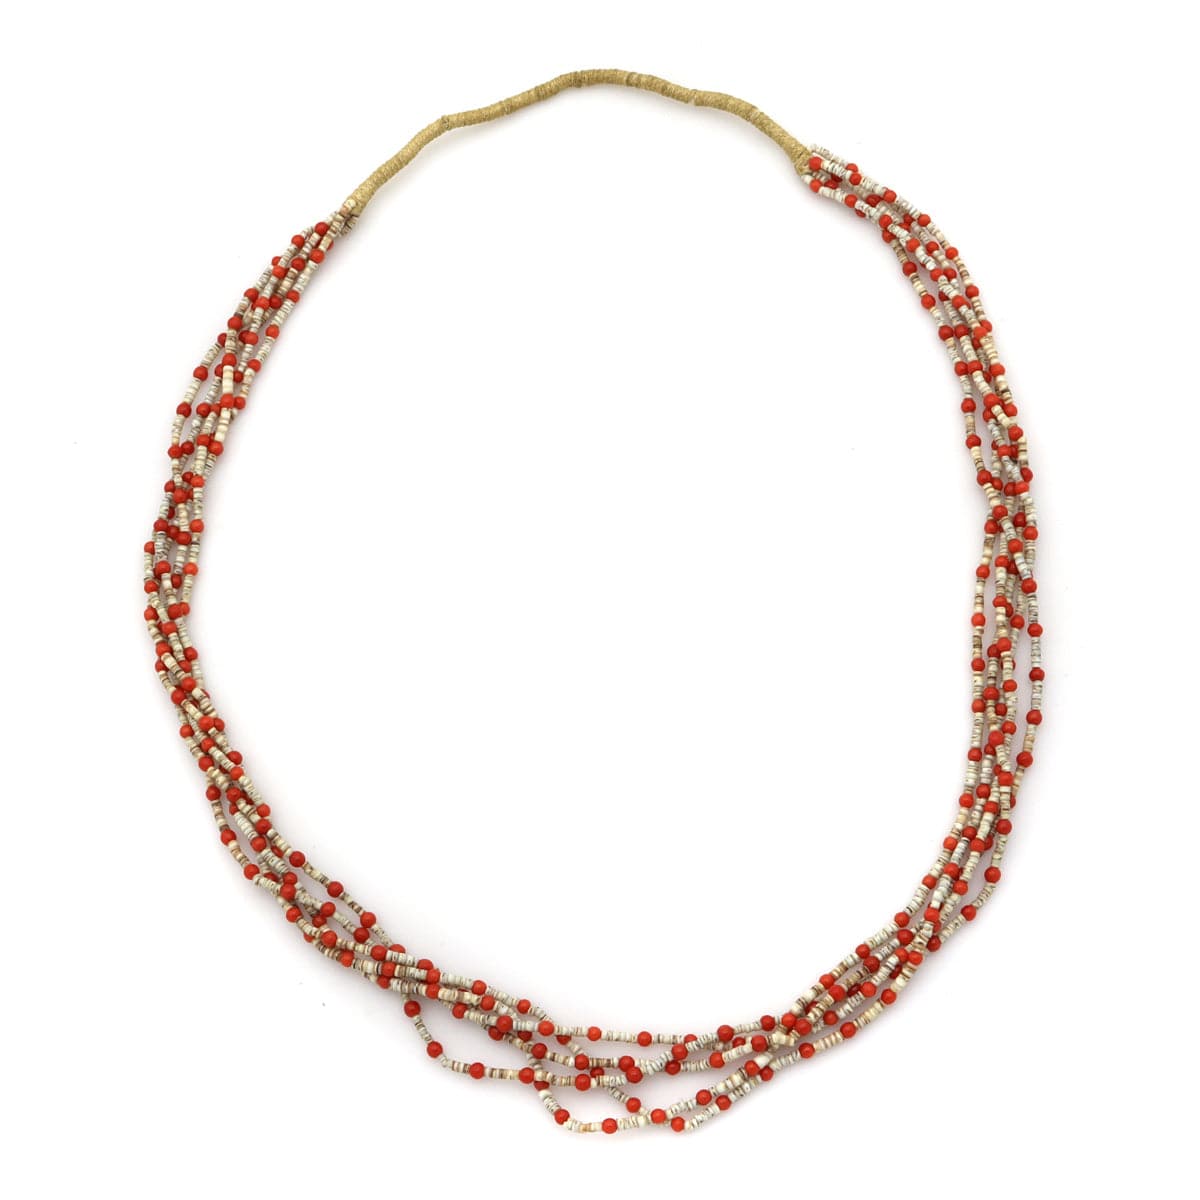 Navajo 5-Strand Coral and Heishi Necklace c. 1960s, 28" length (J13070) 1
